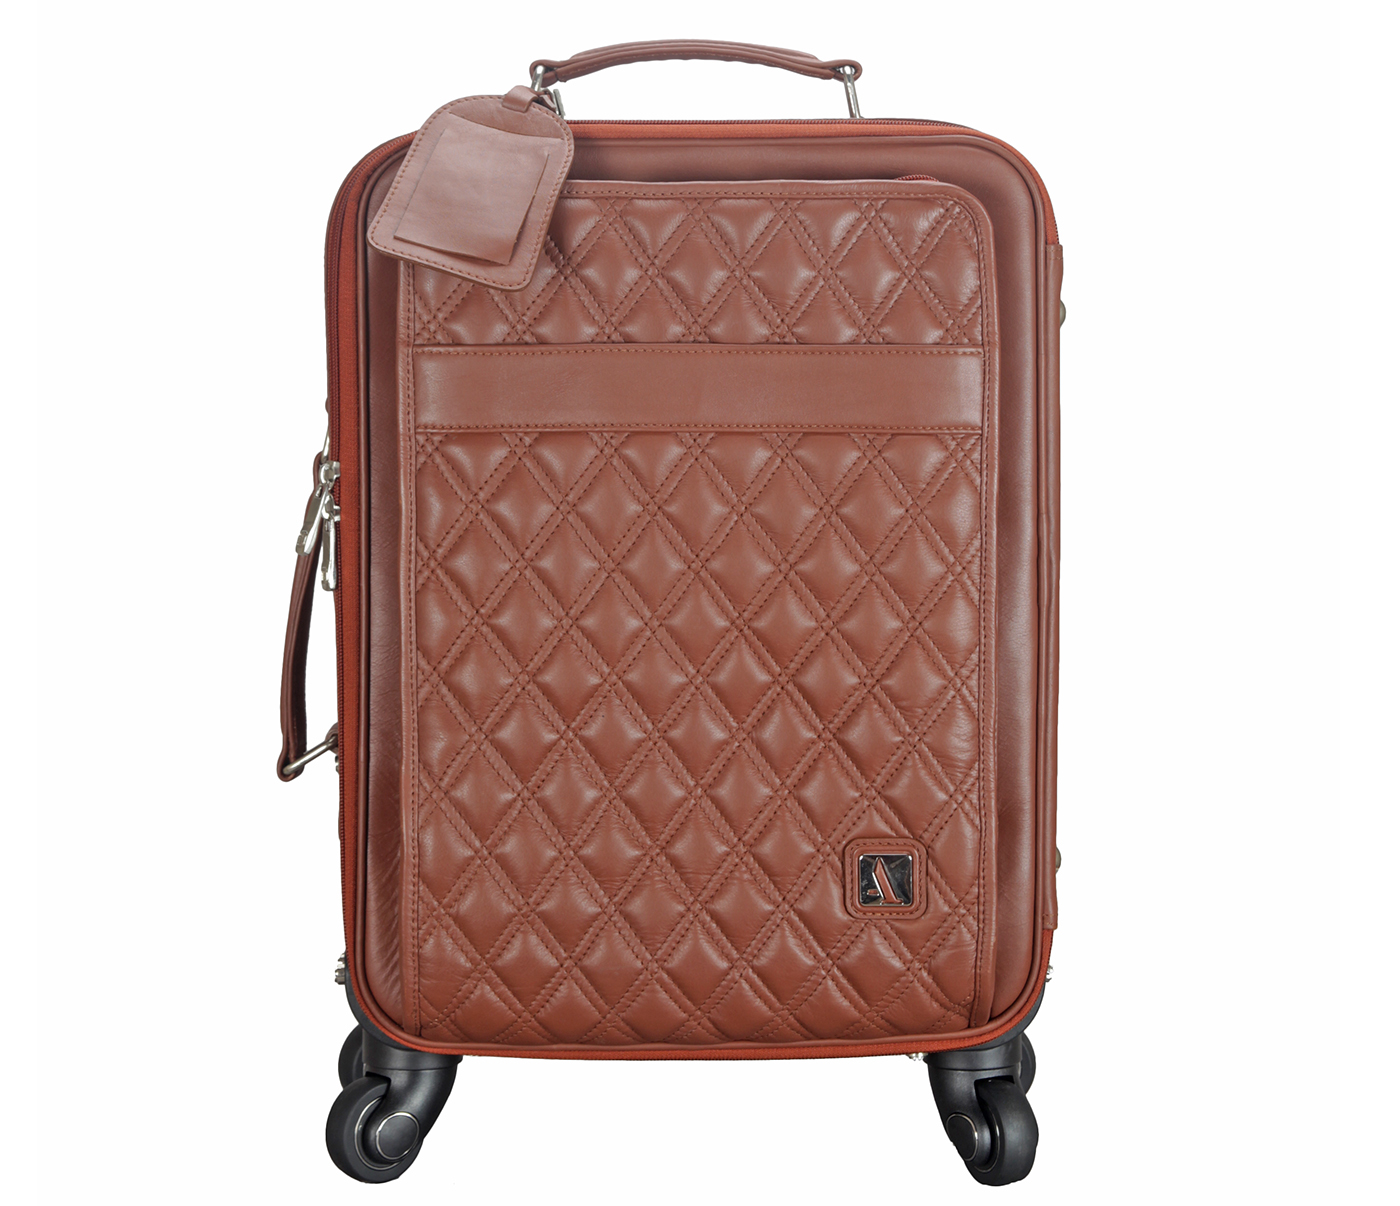 T53-Filippo-Travel cabin luggage strolley in Genuine Leather - Tan